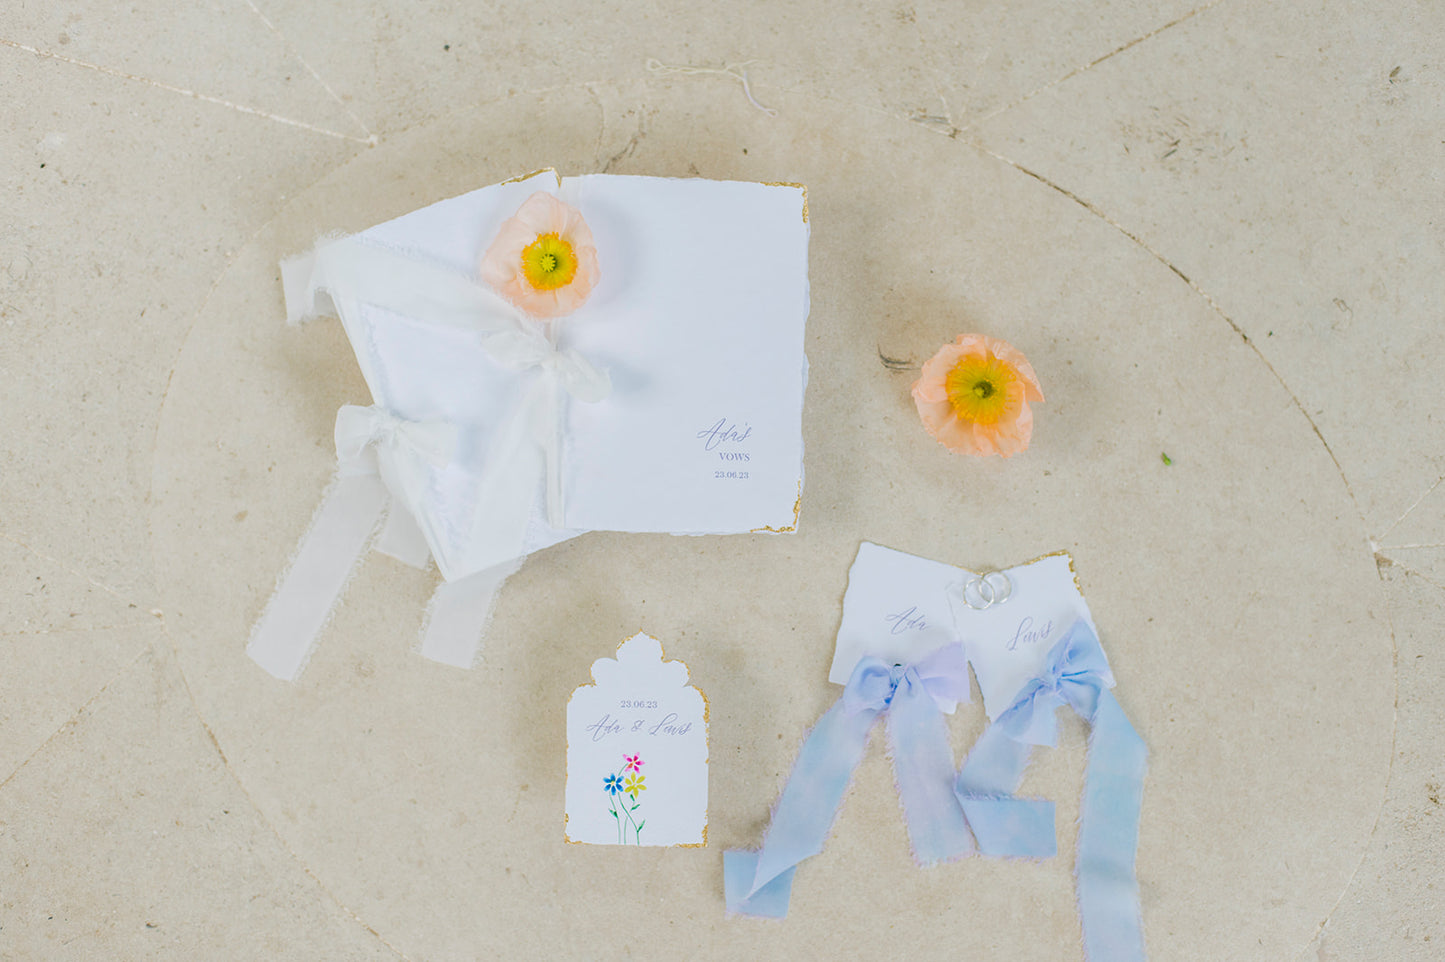 Handmade paper Place cards with hand-dyed Ribbons